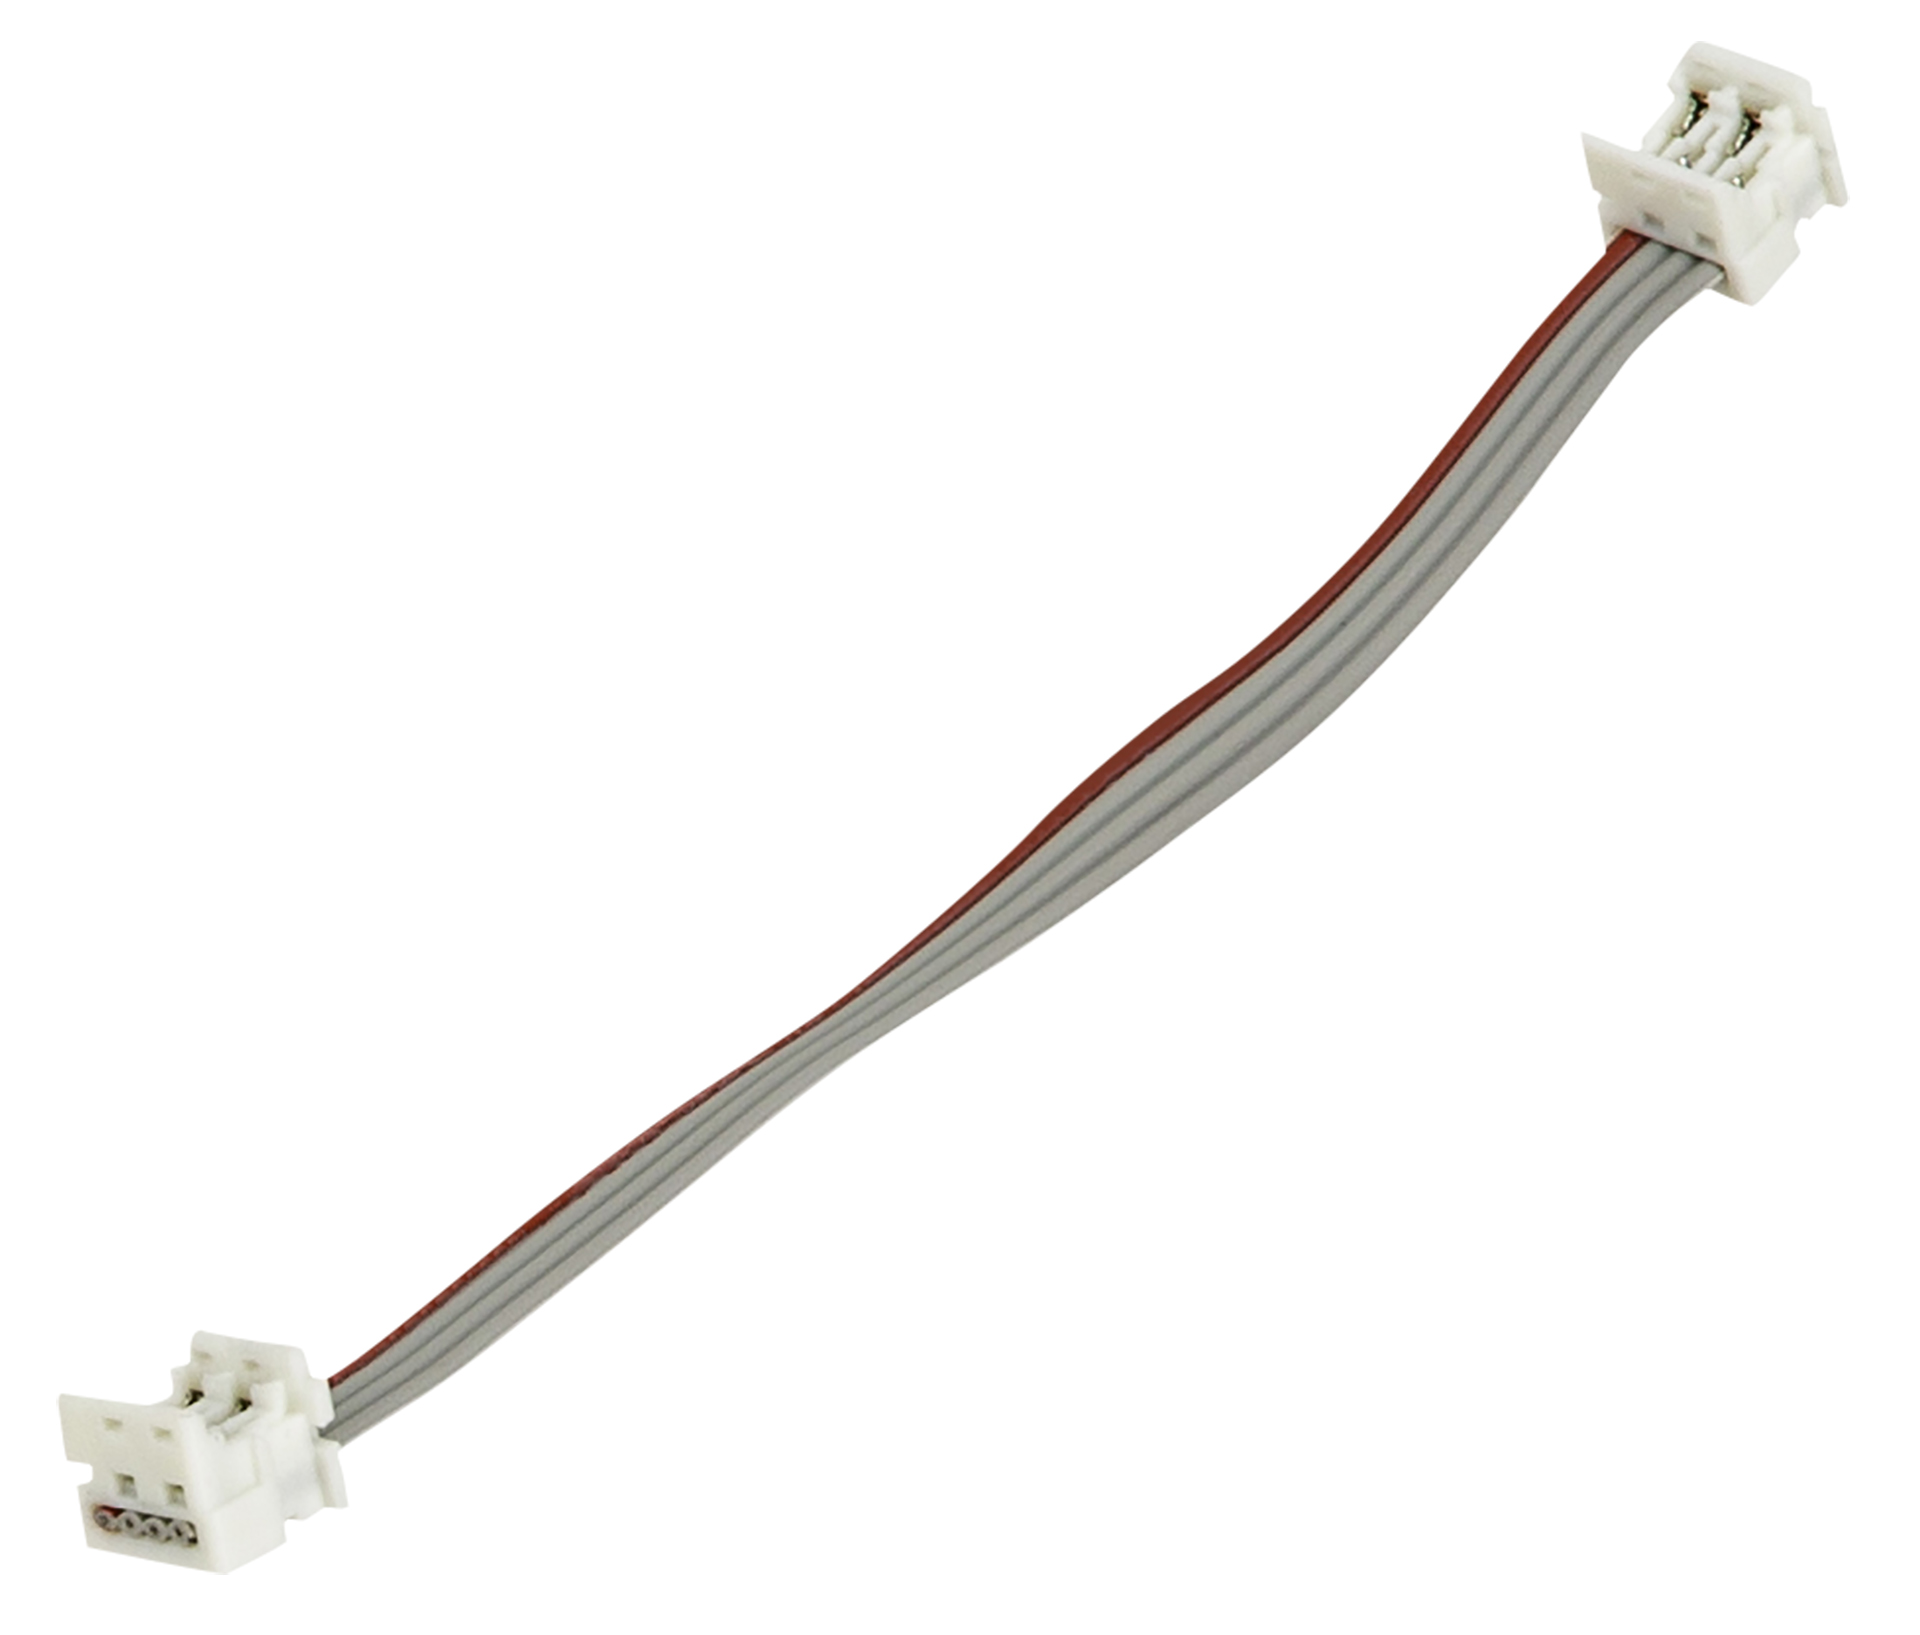 Warwick Parts - Flatcable for Warwick Electronics, 100 mm, 4-pin Connector